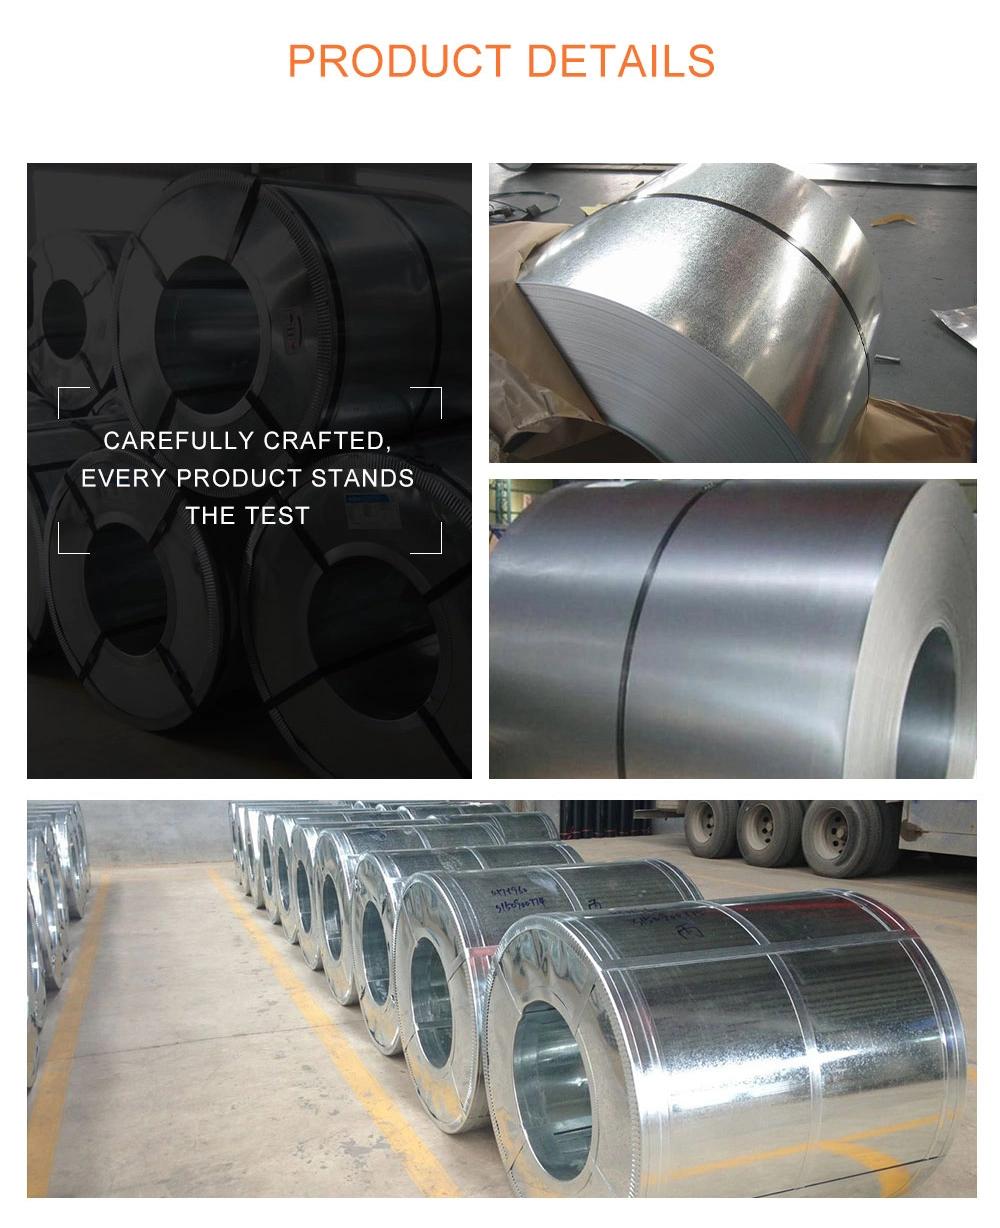 Manufacturer in China Gi Steel Coils Price Per Ton Cgss ASTM AISI Standard Galvanzied Steel Coil